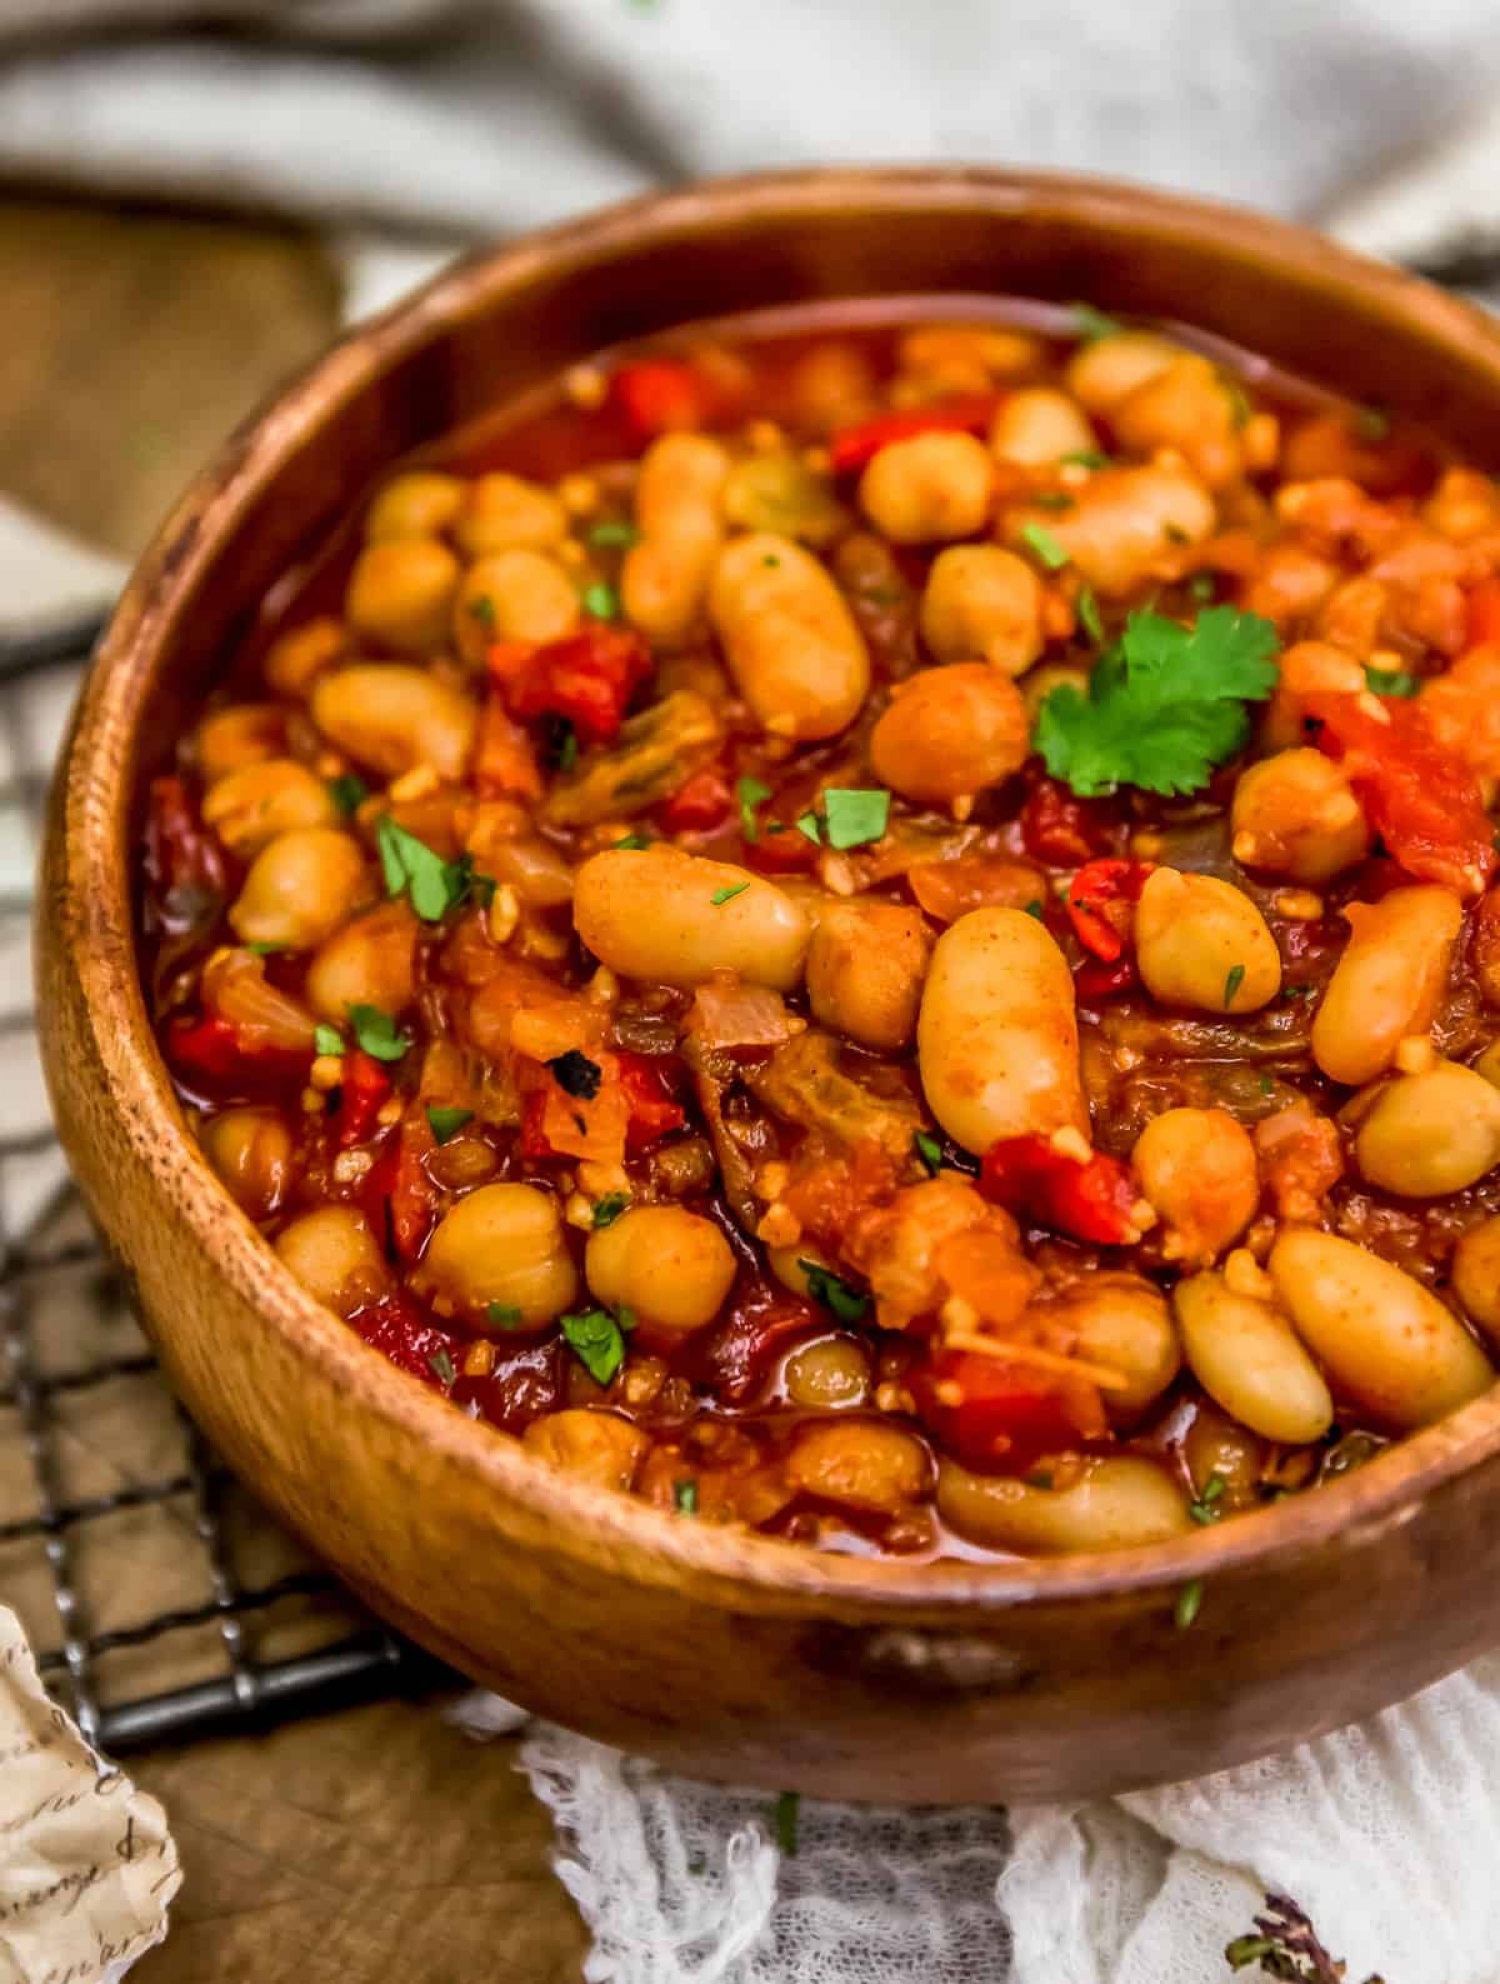 <p>These Moroccan-spiced beans are deliciously fragrant and cook up in just one skillet with roasted red bell peppers, golden raisins and Medjool dates. Its rich flavors reflect the vibrant seasonings that are omnipresent in the North African cuisine. <a href="https://monkeyandmekitchenadventures.com/moroccan-skillet-beans/" rel="noopener">Get the recipe here.</a></p>